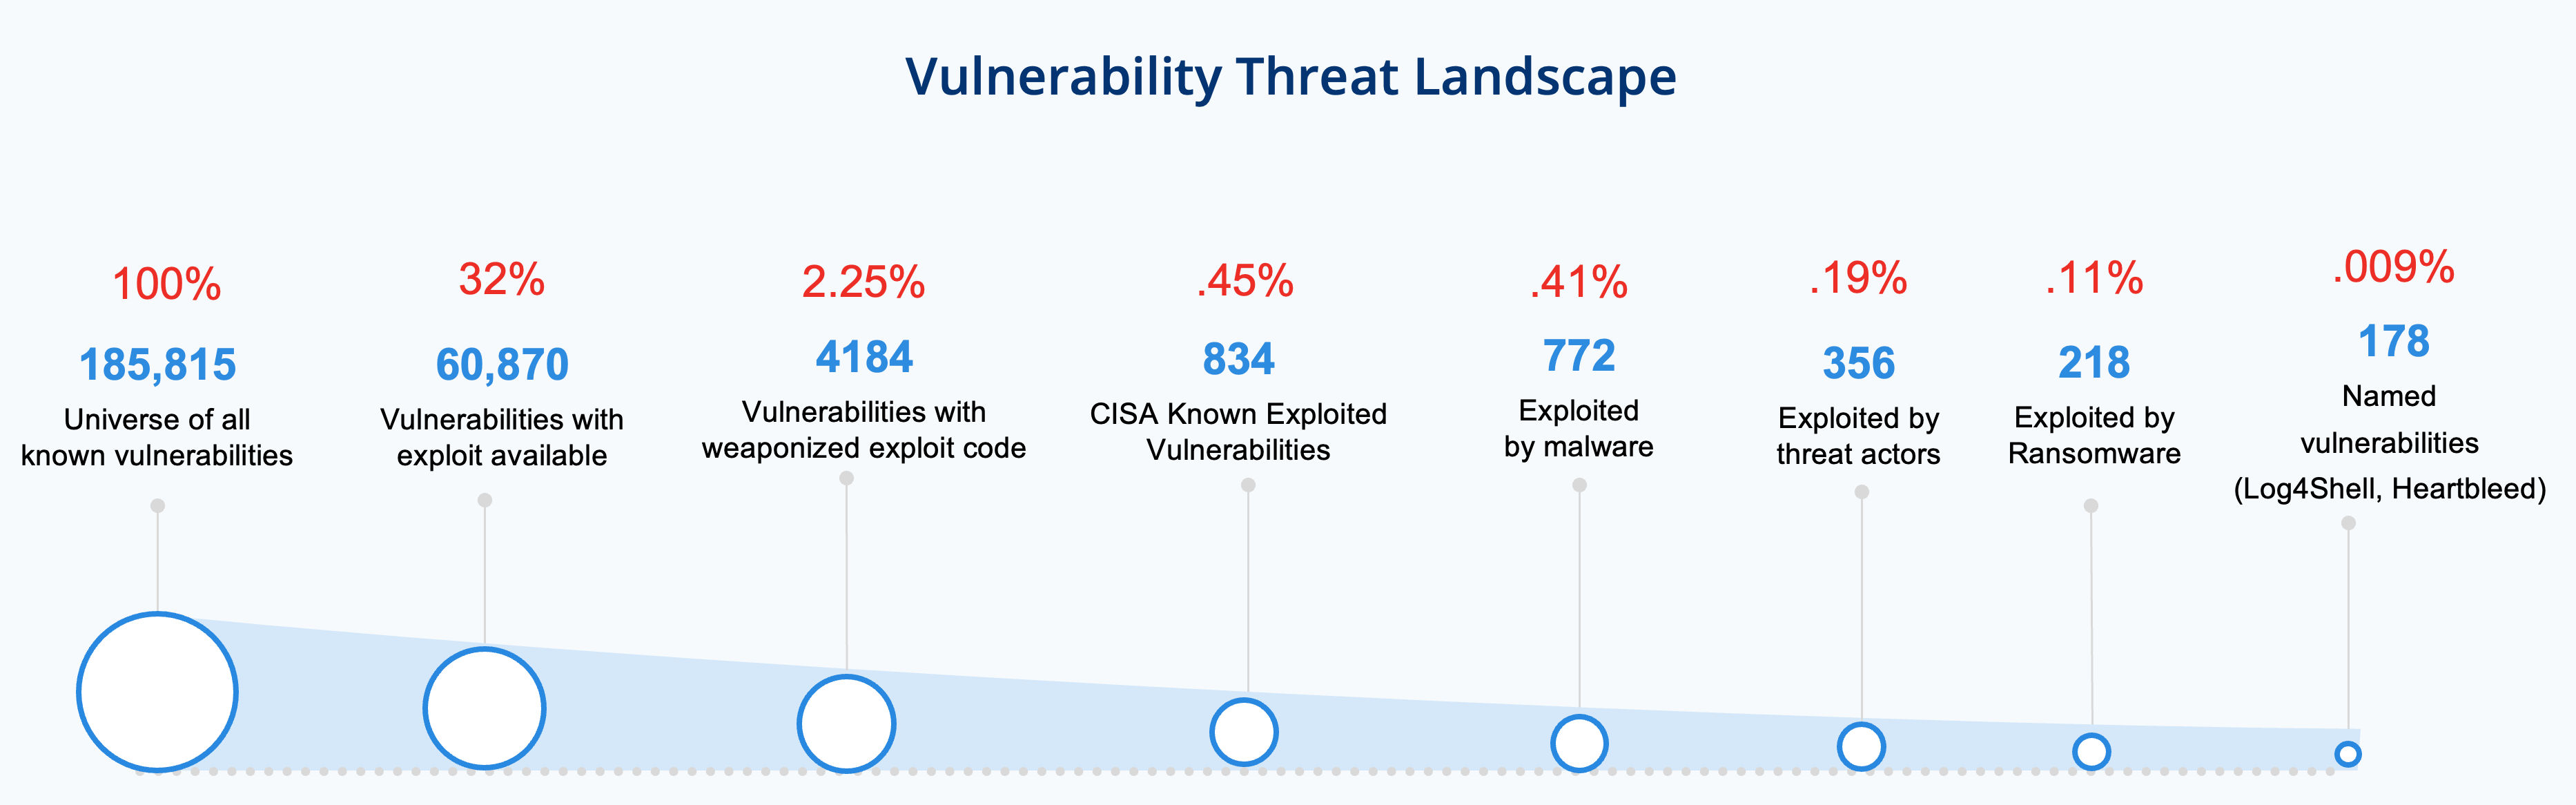 A view of the Vulnerability Threat Landscape
